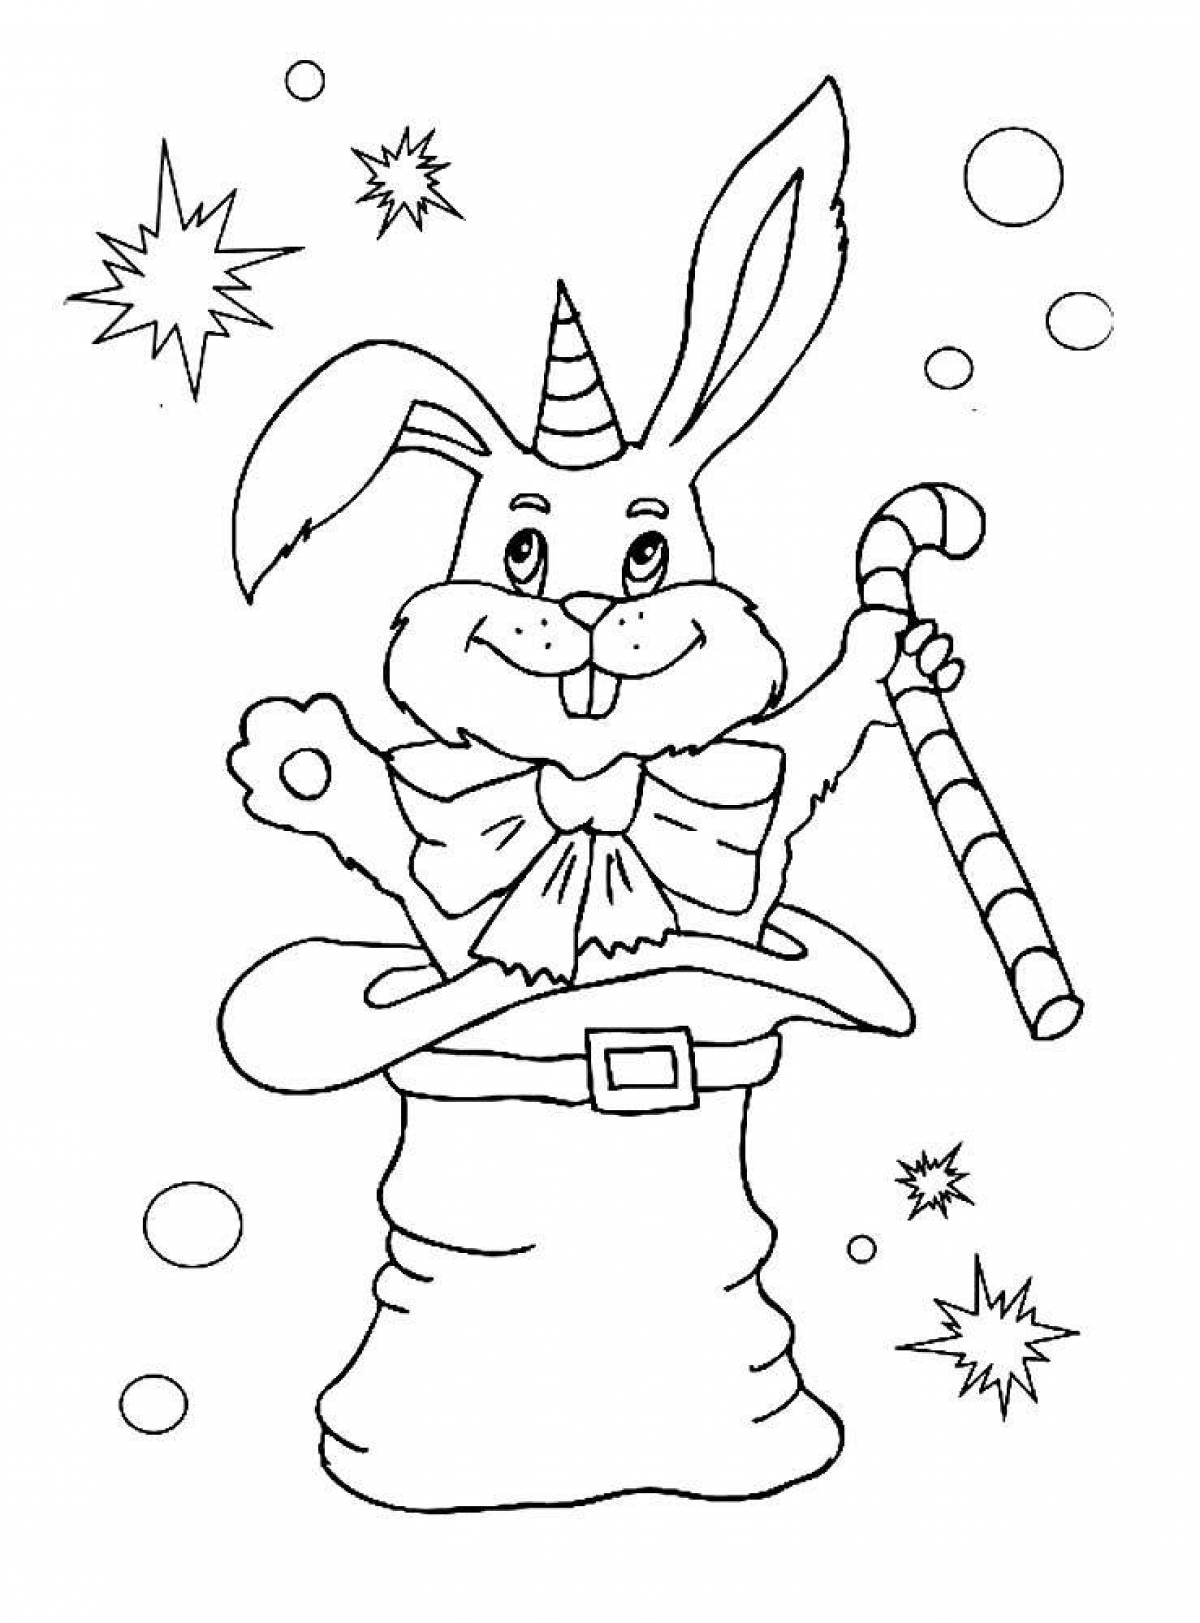 Colored Christmas bunny coloring book